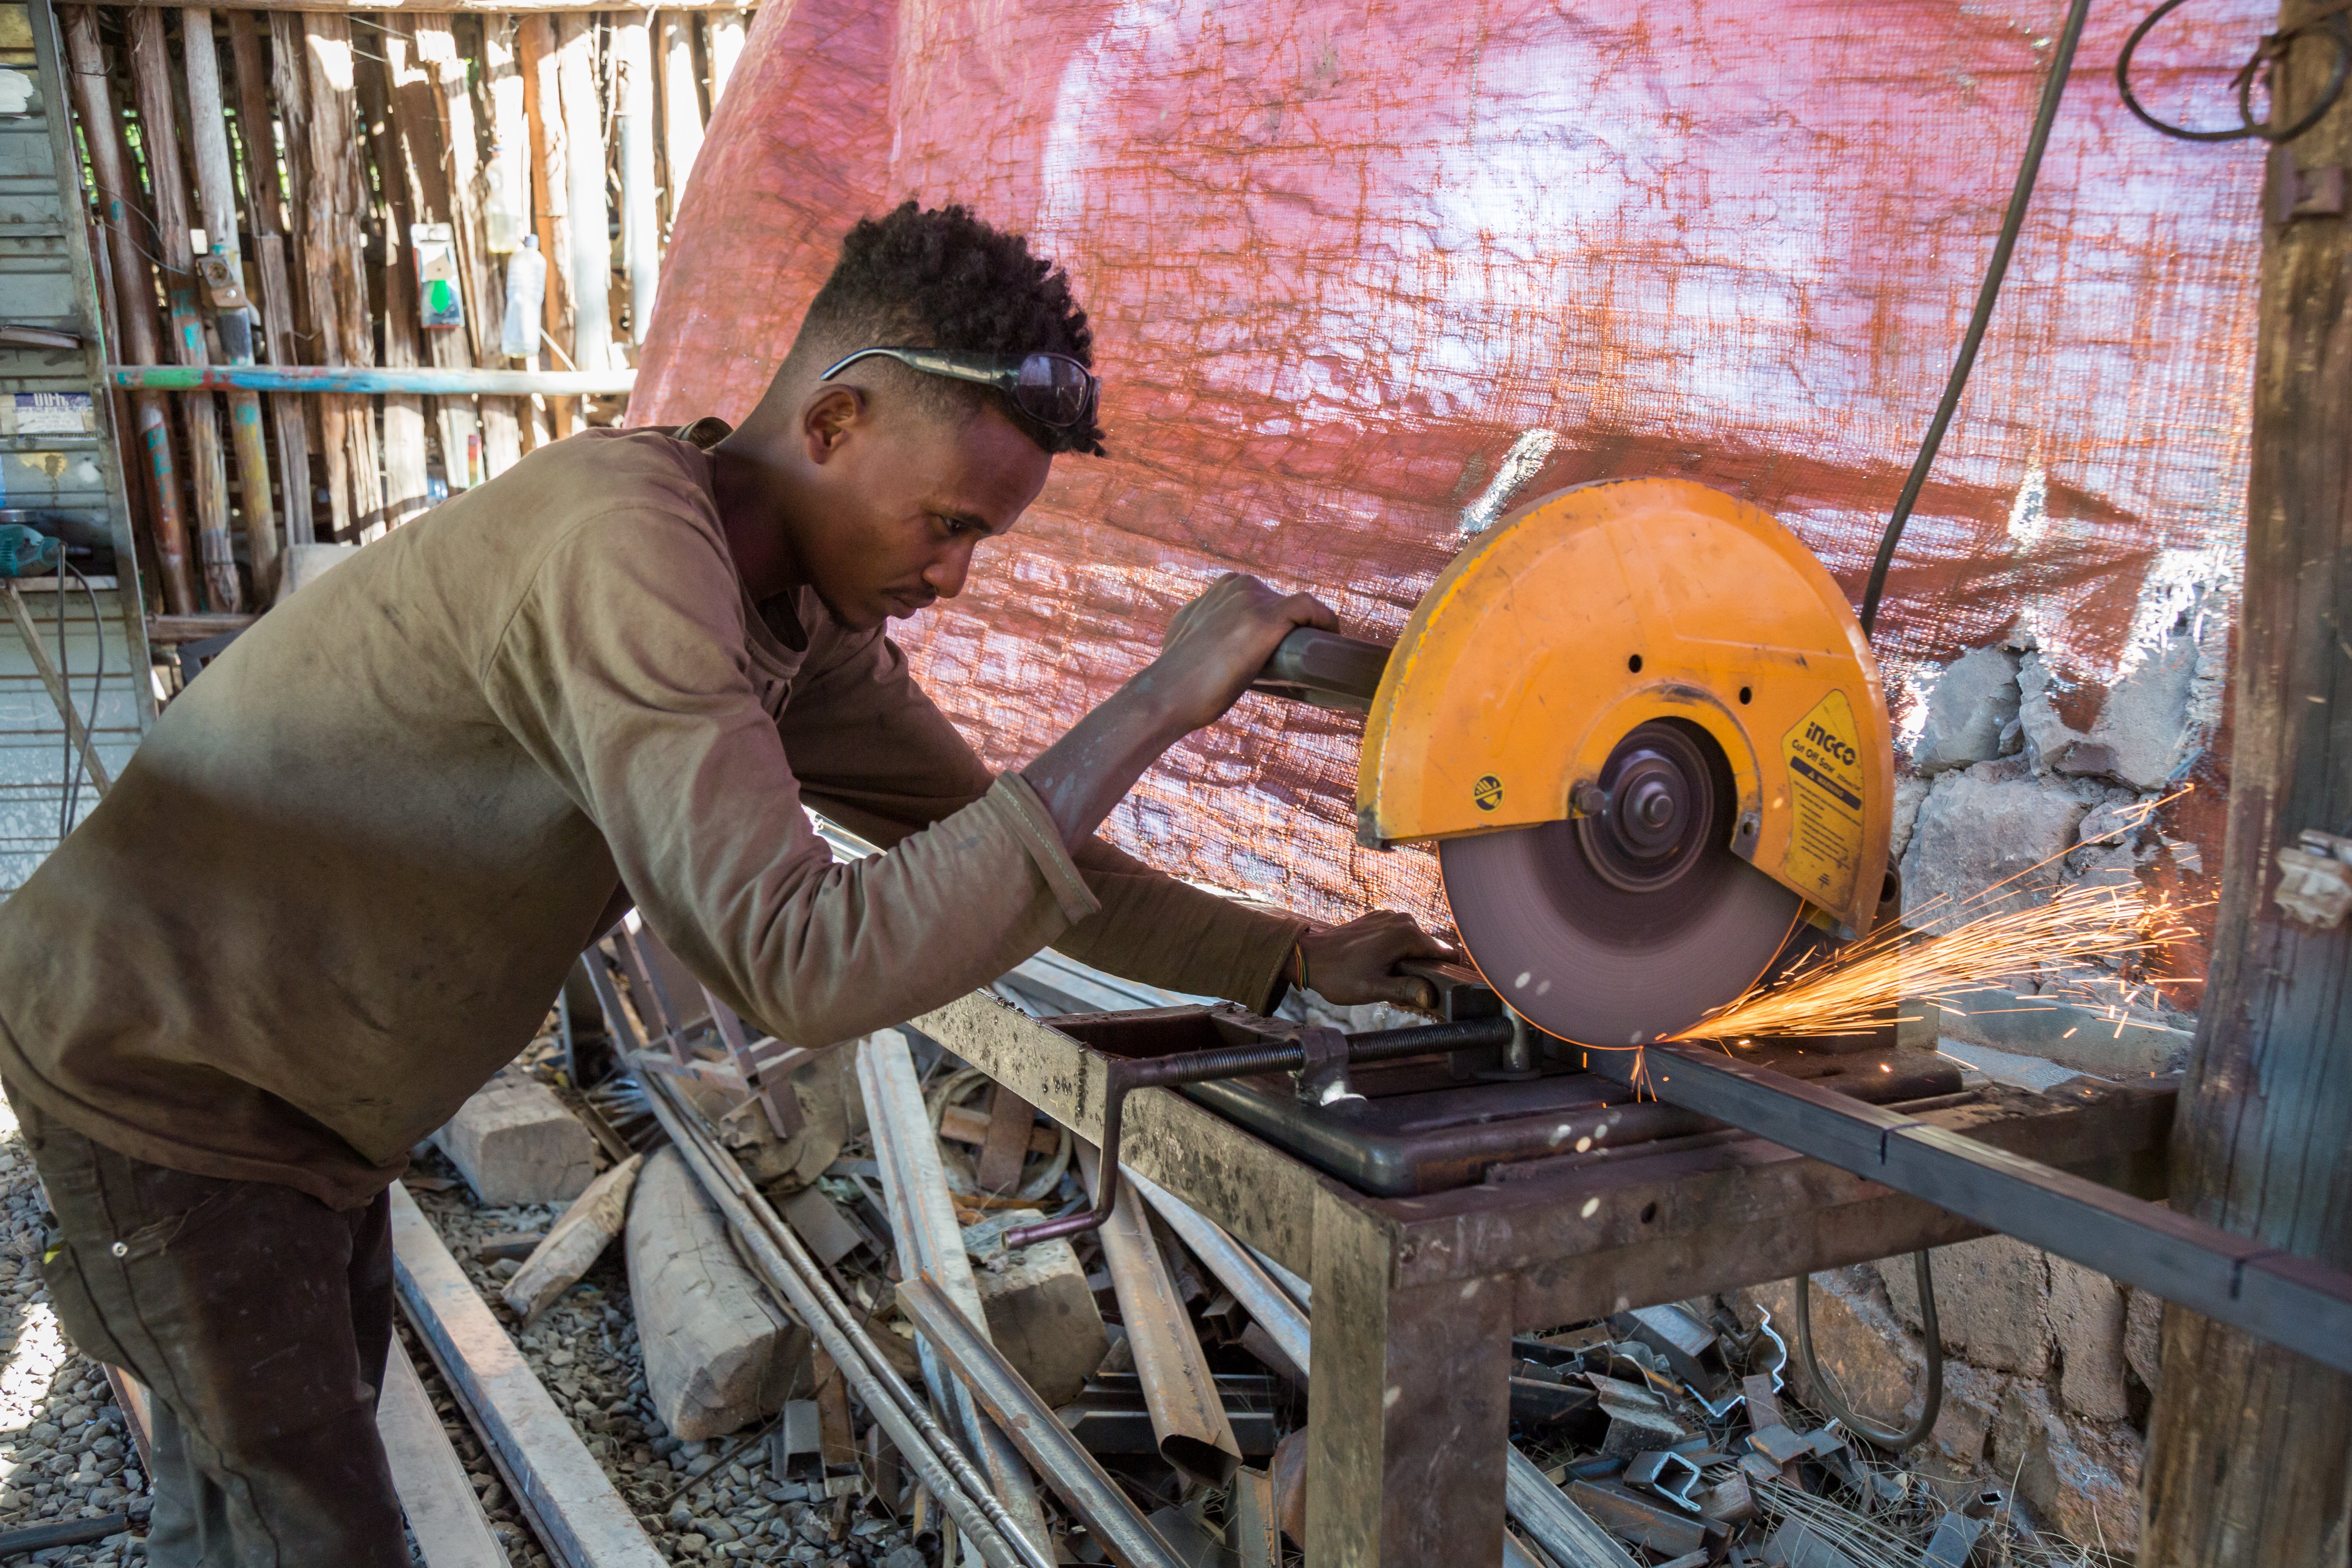 An adolescent boy working as a metal worker in Ethiopia